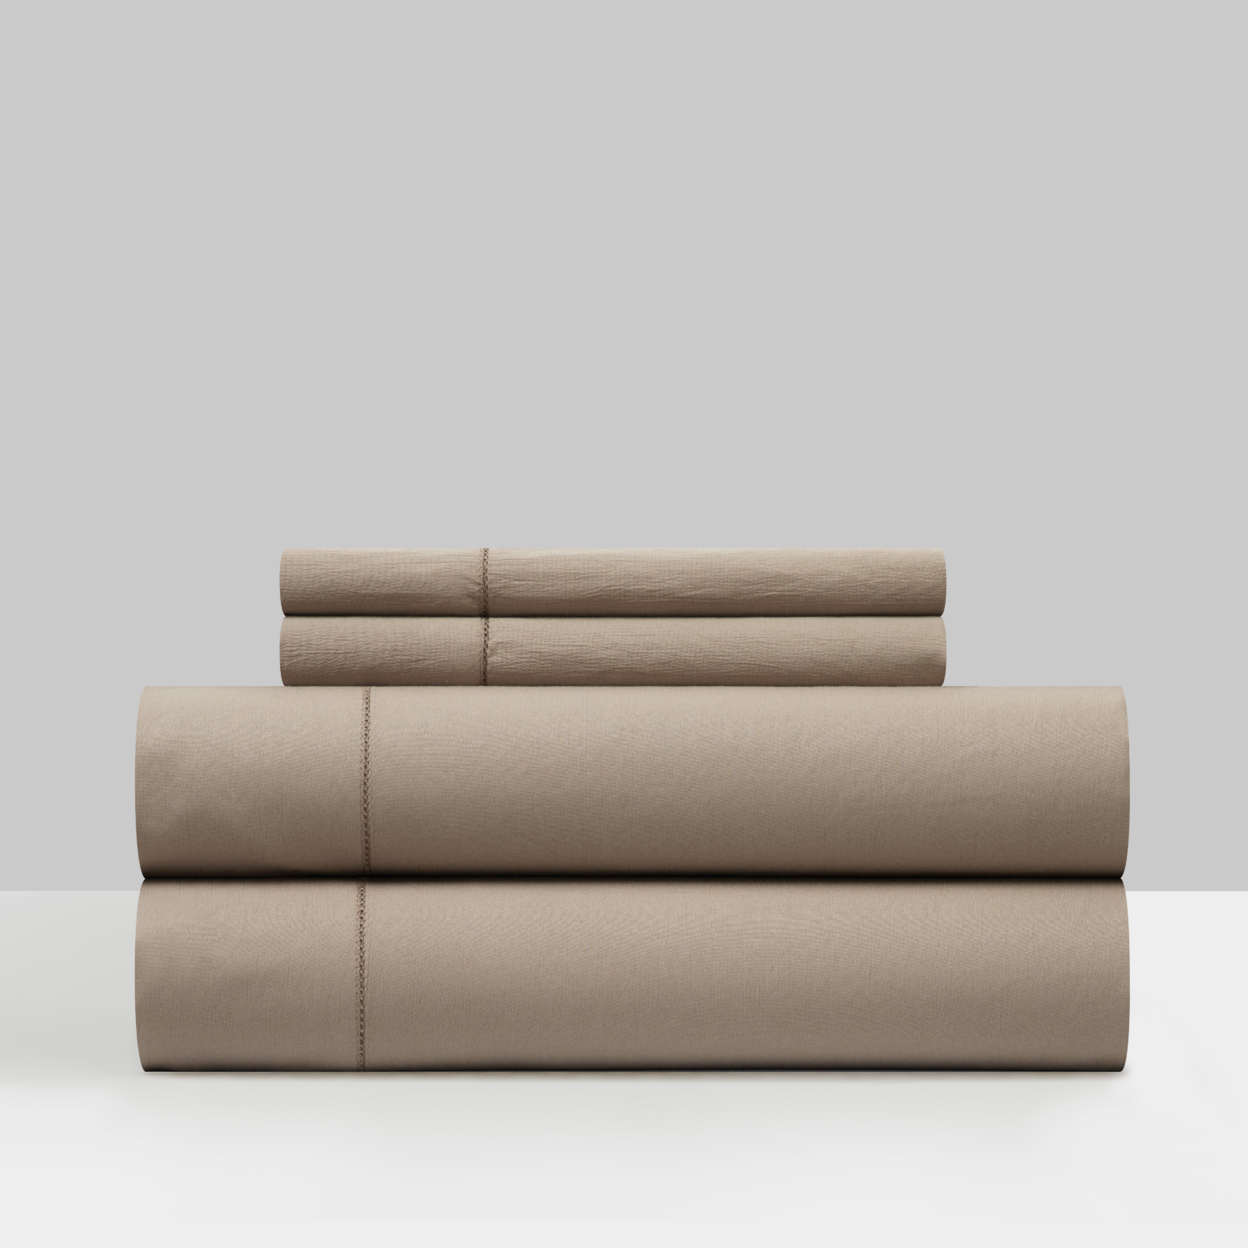 Daisy 3 Or 4 Piece Sheet Set Solid Color Washed Garment Technique - Taupe, King